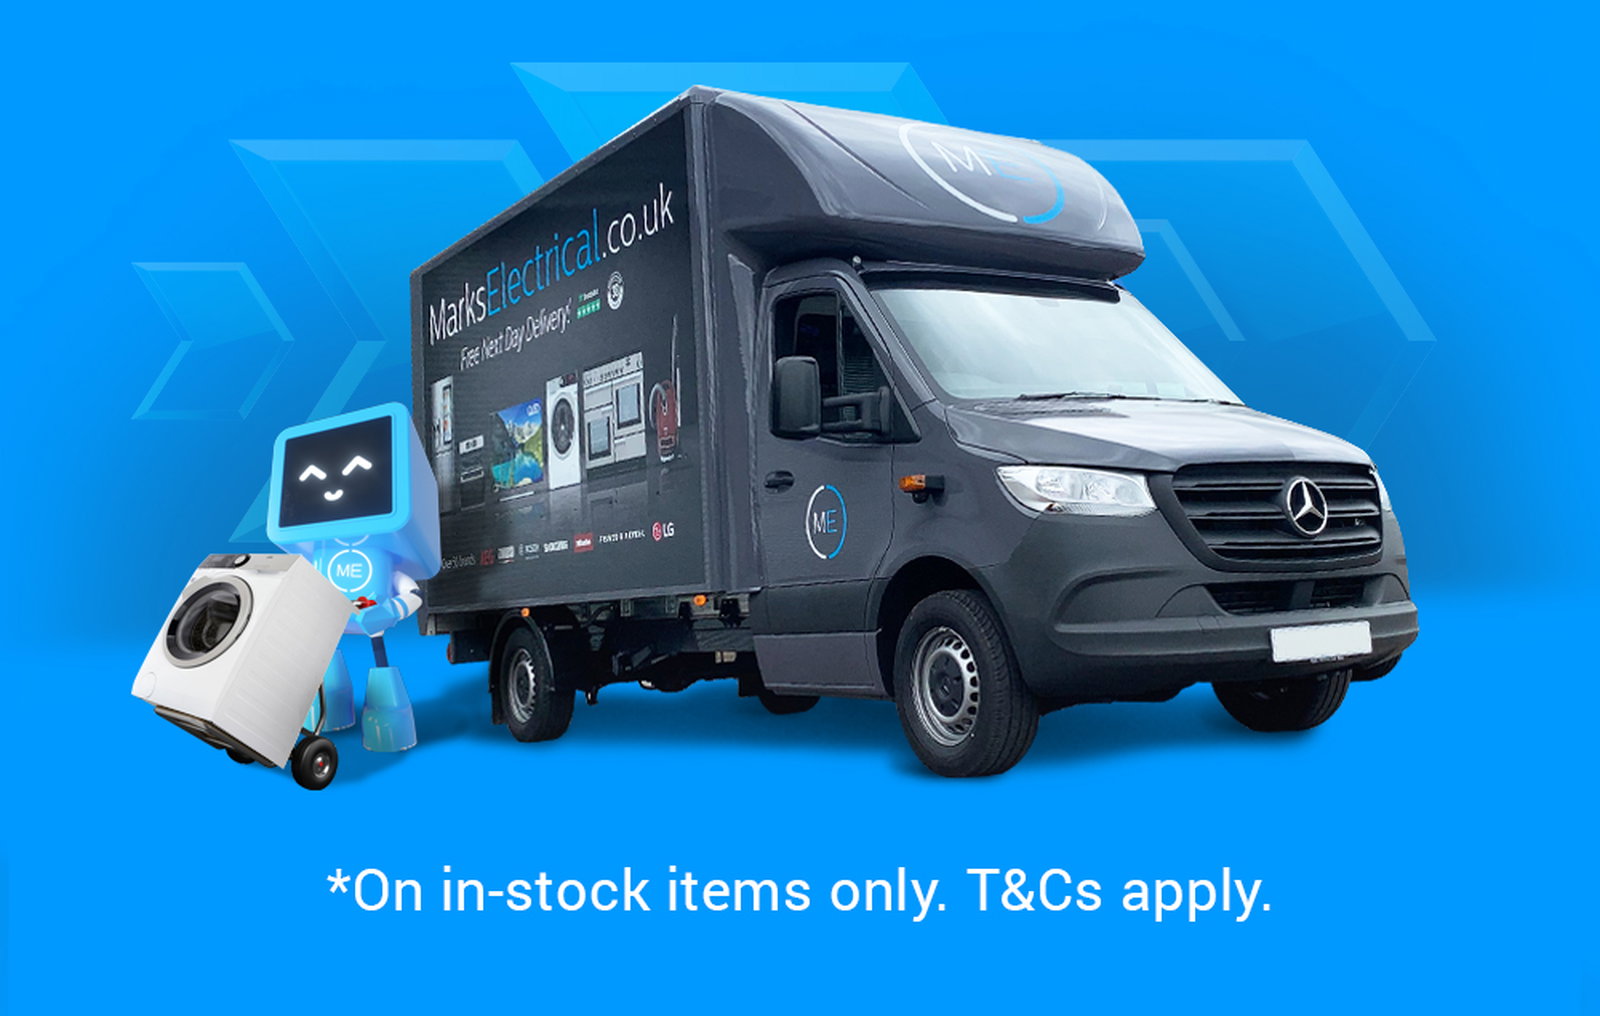 Marks Electrical: Free Next Day Delivery Available! | Milled